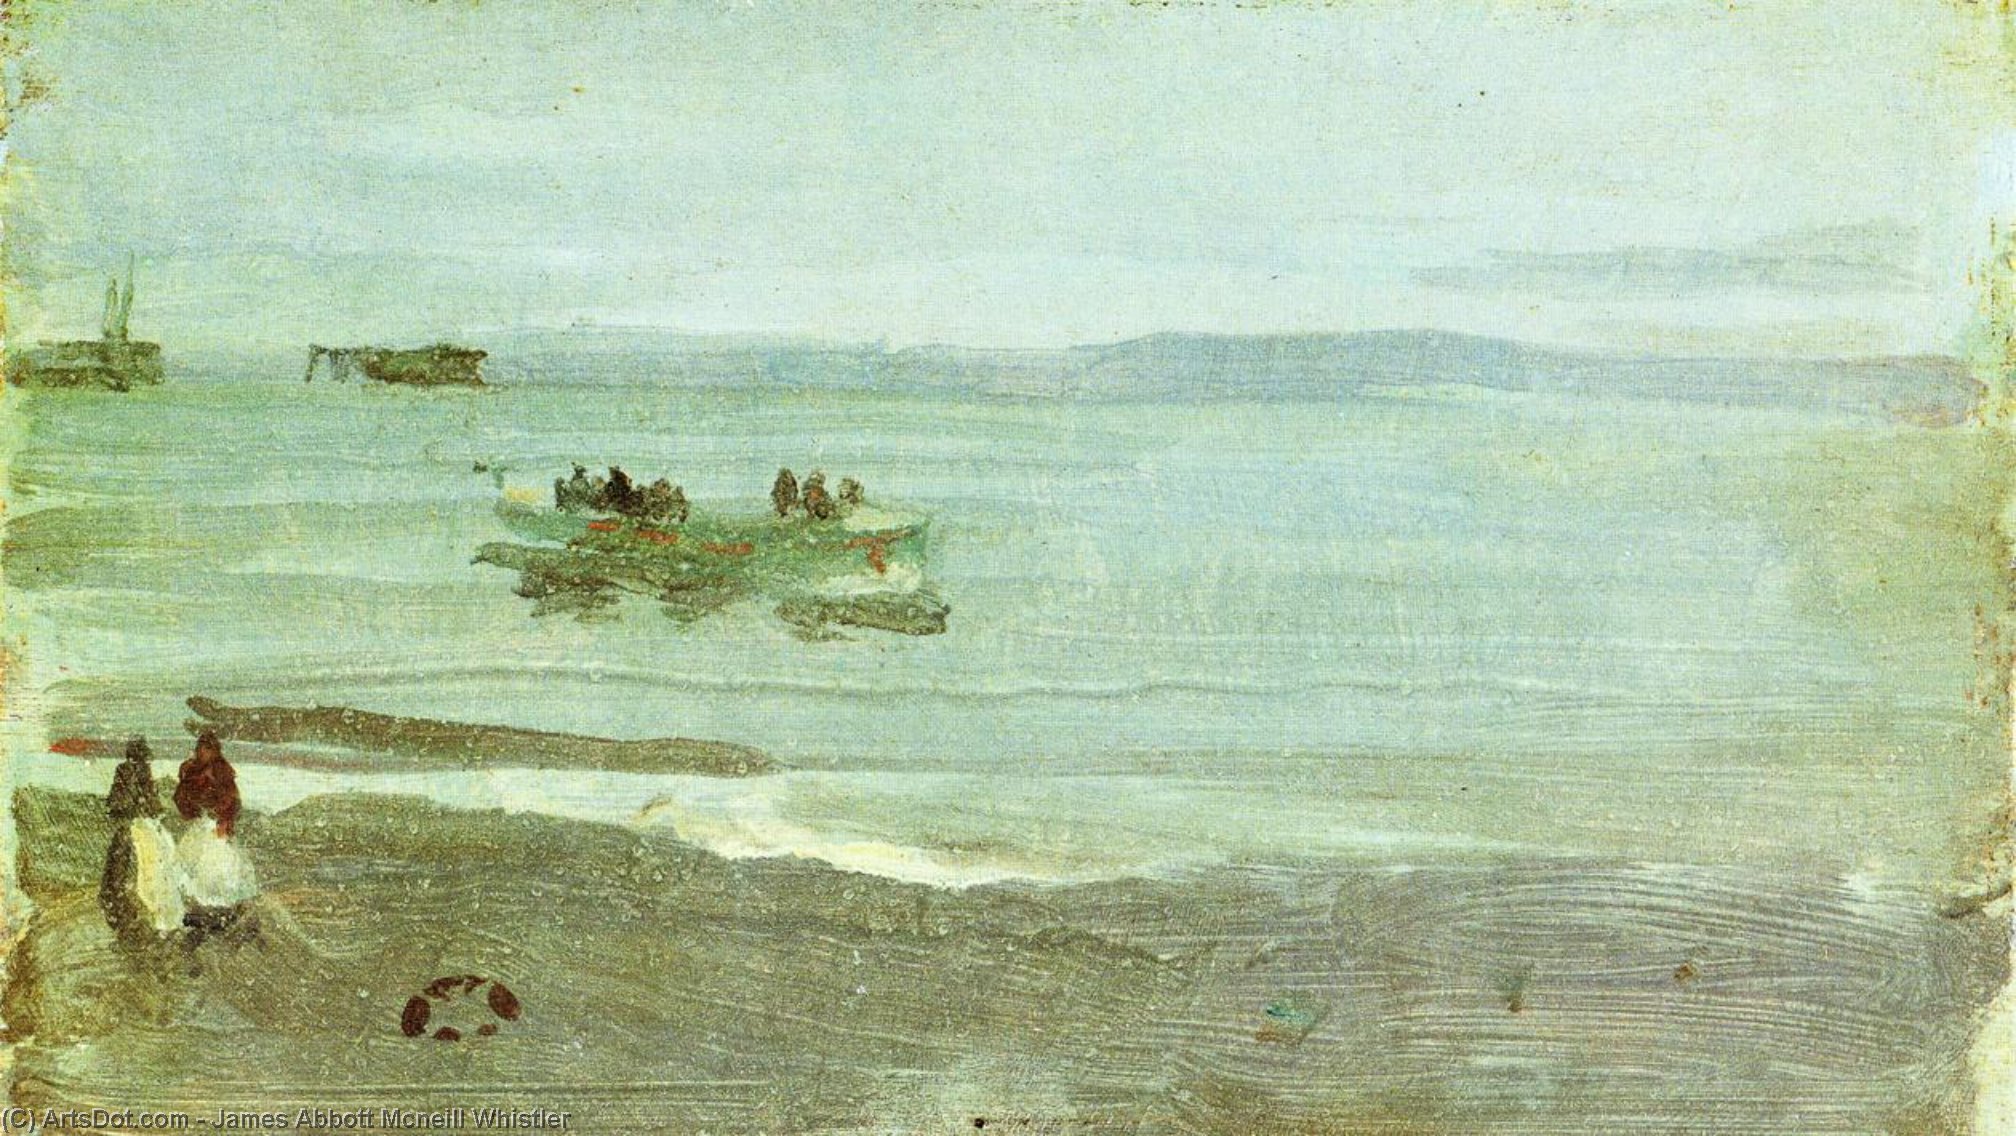 Buy Museum Art Reproductions Grey and Silver: Mist - Lifeboat, 1884 by James Abbott Mcneill Whistler (1834-1903, United States) | ArtsDot.com